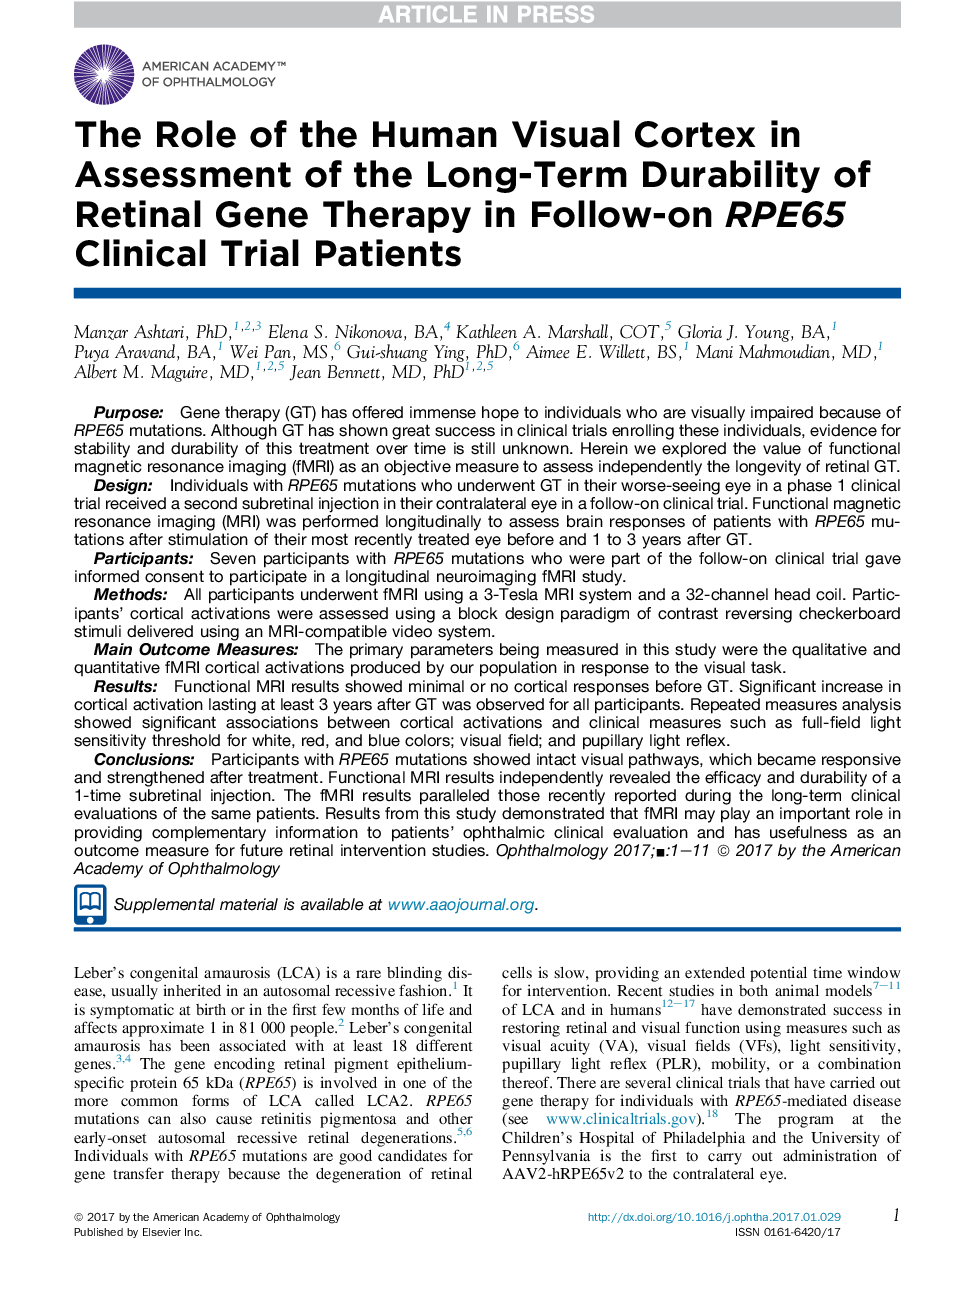 The Role of the Human Visual Cortex in Assessment of the Long-Term Durability of Retinal Gene Therapy in Follow-on RPE65 Clinical Trial Patients